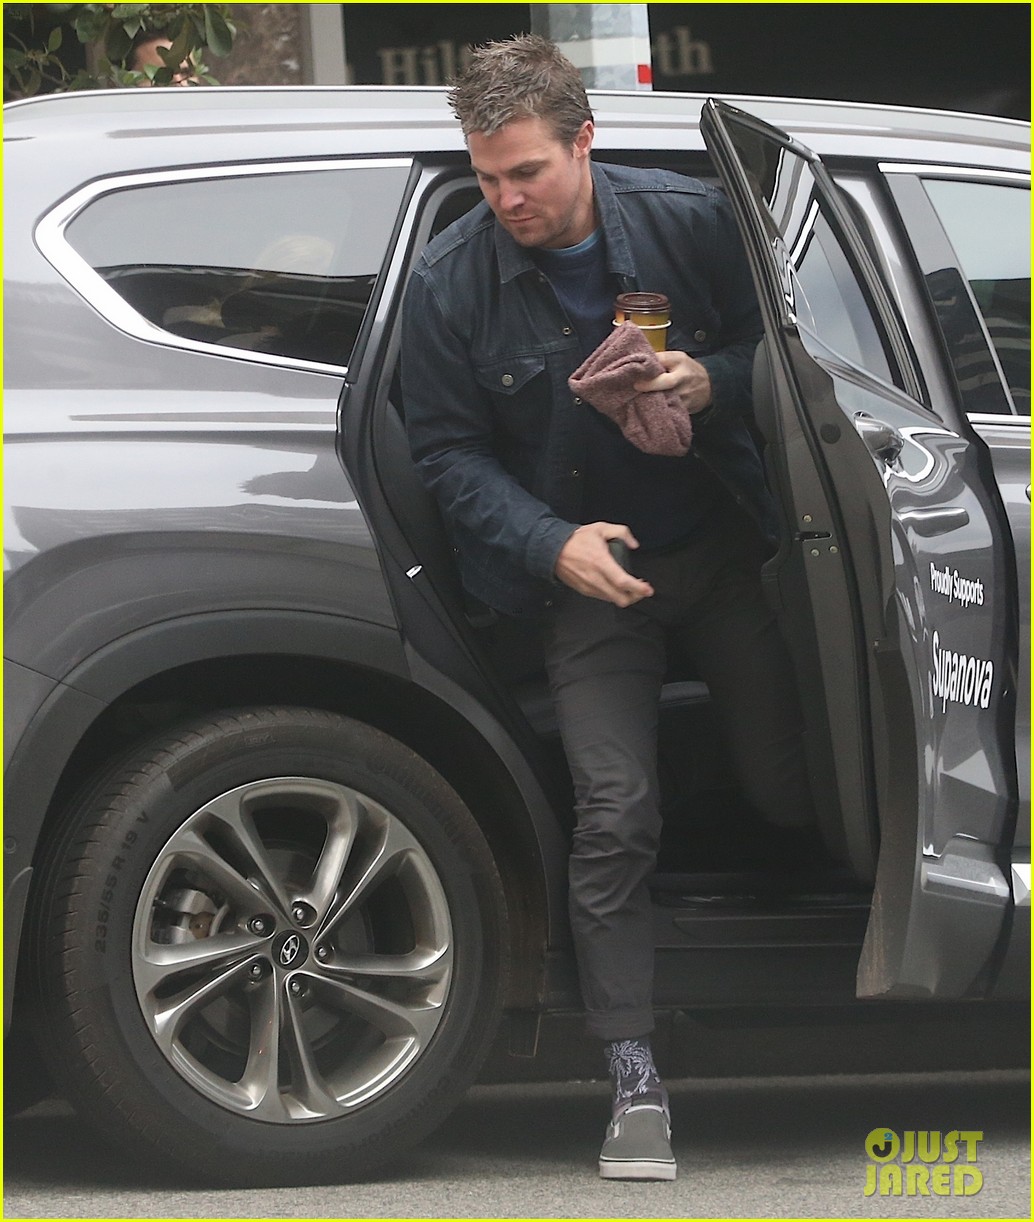 Photo of Robbie Amell  - car
